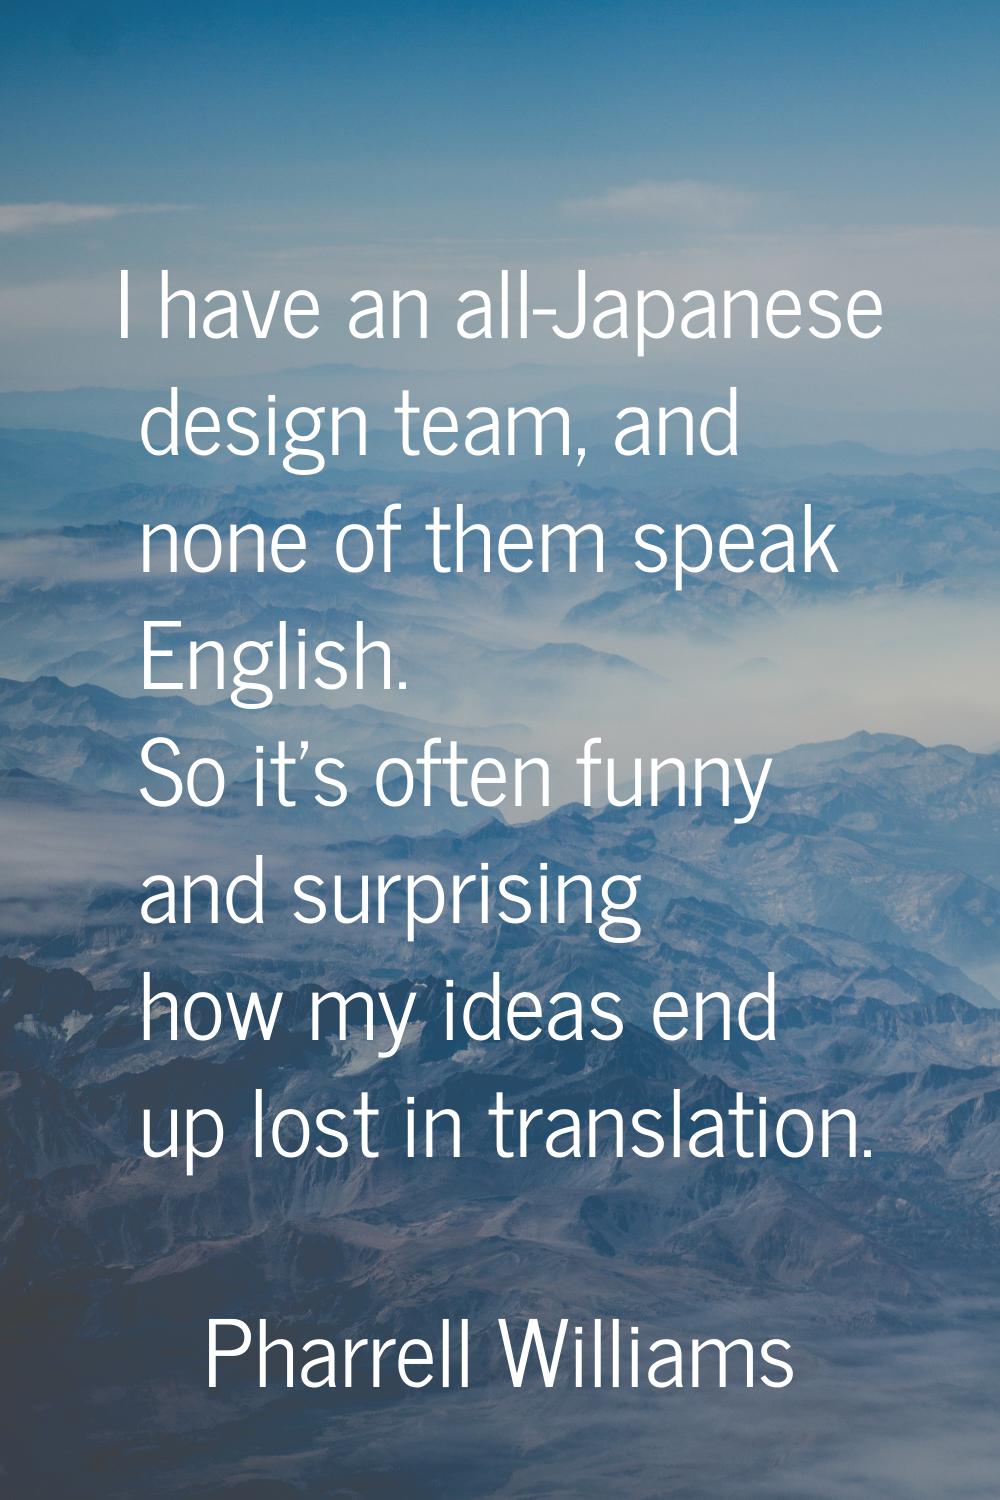 I have an all-Japanese design team, and none of them speak English. So it's often funny and surpris